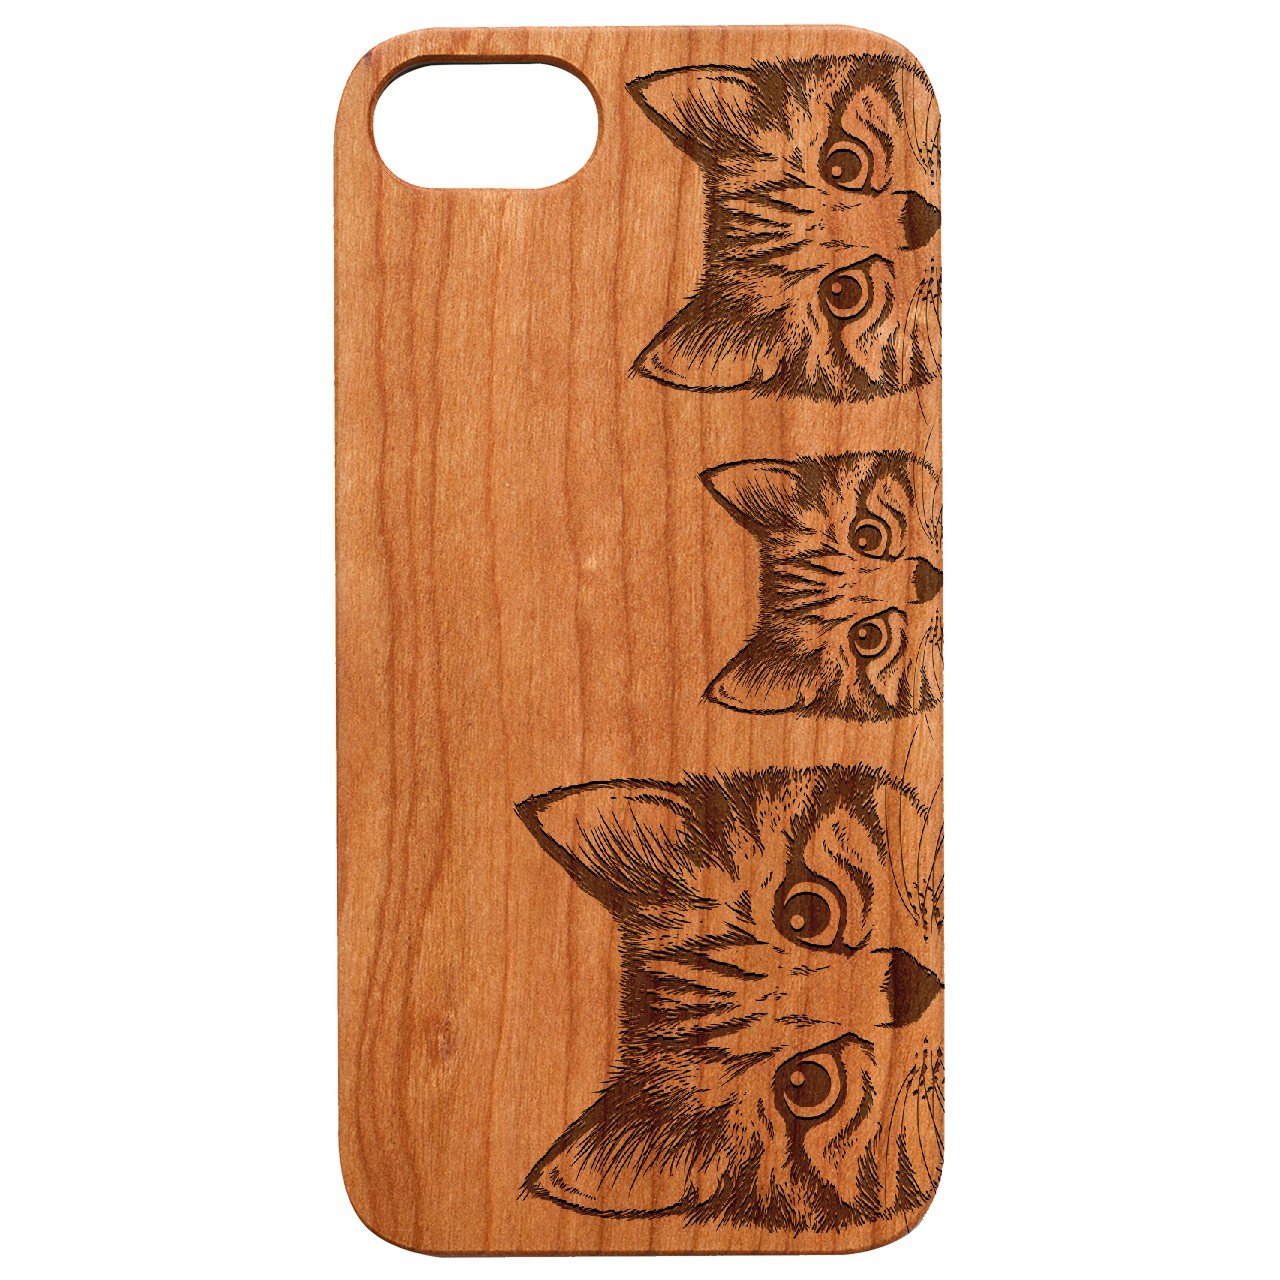 Curious Cats - Engraved - Wooden Phone Case